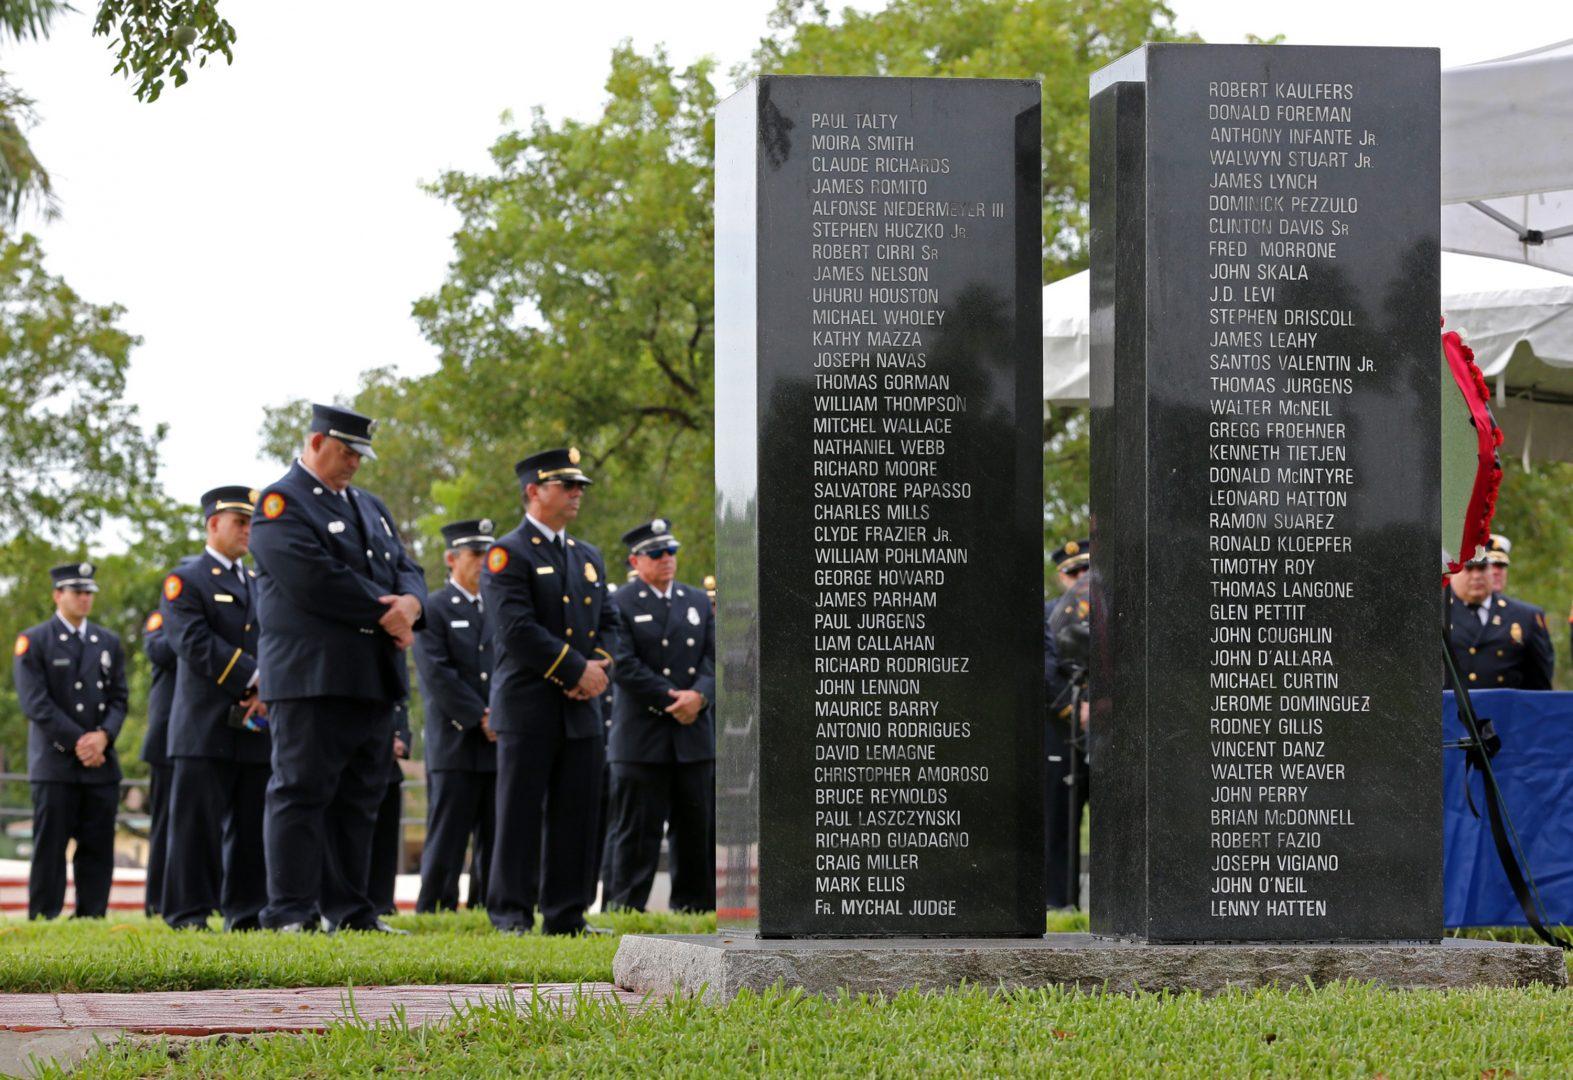 Firefighters and police attend the 9/11 Ceremony of Remembrance at Tropical Park, hosted by the Miami-Dade Police Department and Miami-Dade Fire Rescue, on Tuesday, Sept. 11, 2018 in Miami, Fla. (Al Diaz/Miami Herald/TNS)